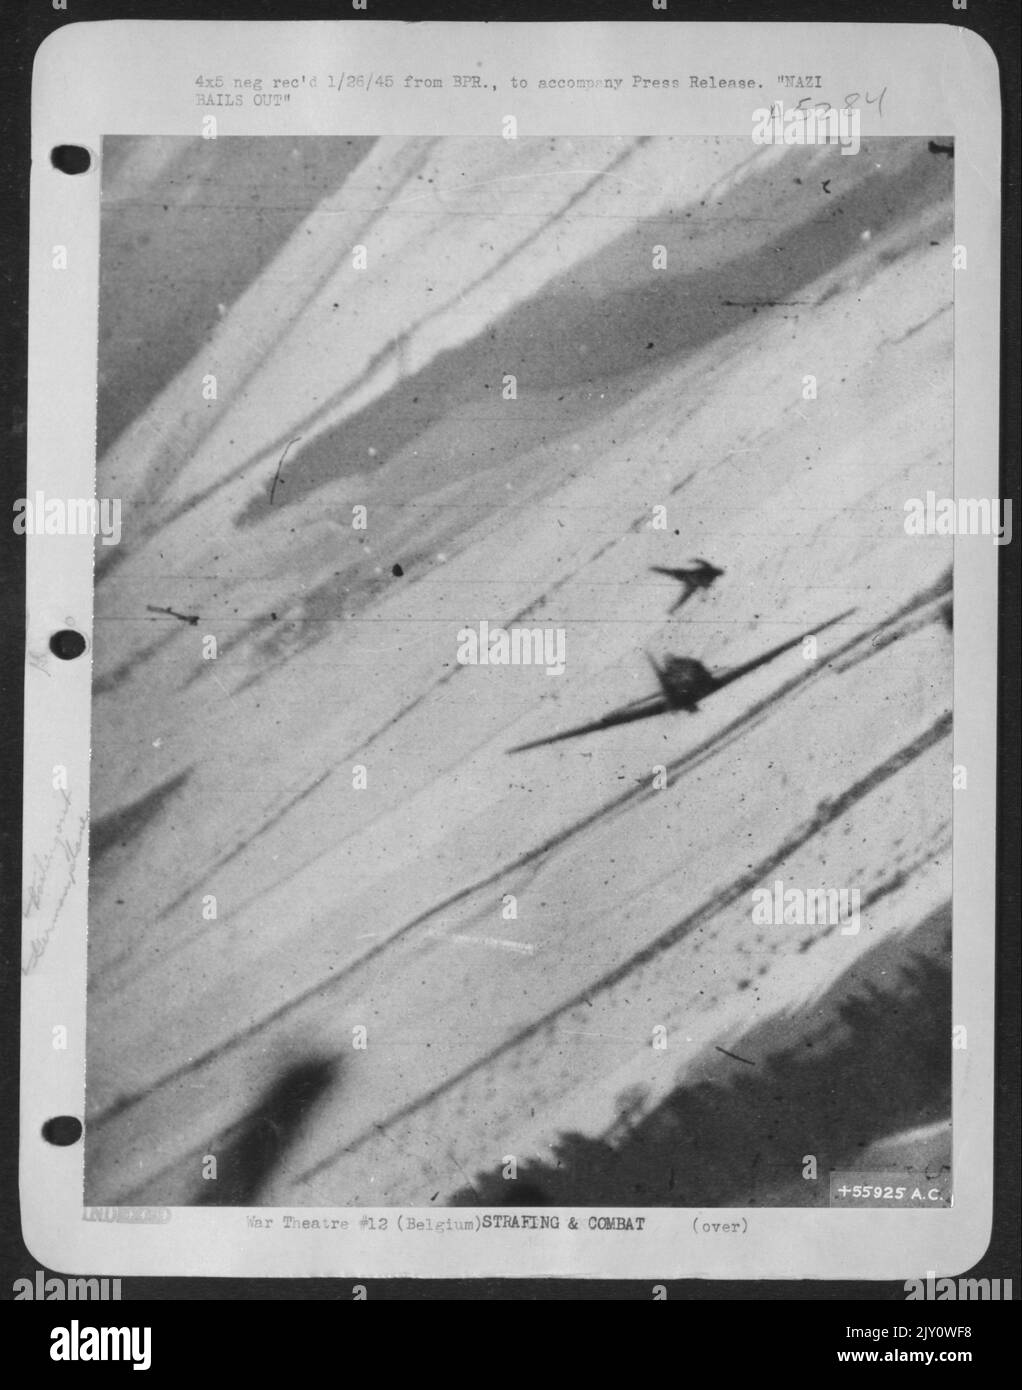 This unusual photograph of a Luftwaffe pilot jumping from his damaged plane was made by Major James Dalglish, Rome, N.Y., a U.S. 9th Air force fighter-bomber pilot, during a recent air battle over the Belgian Bulge. The enemy pilot deserted his ship Stock Photo